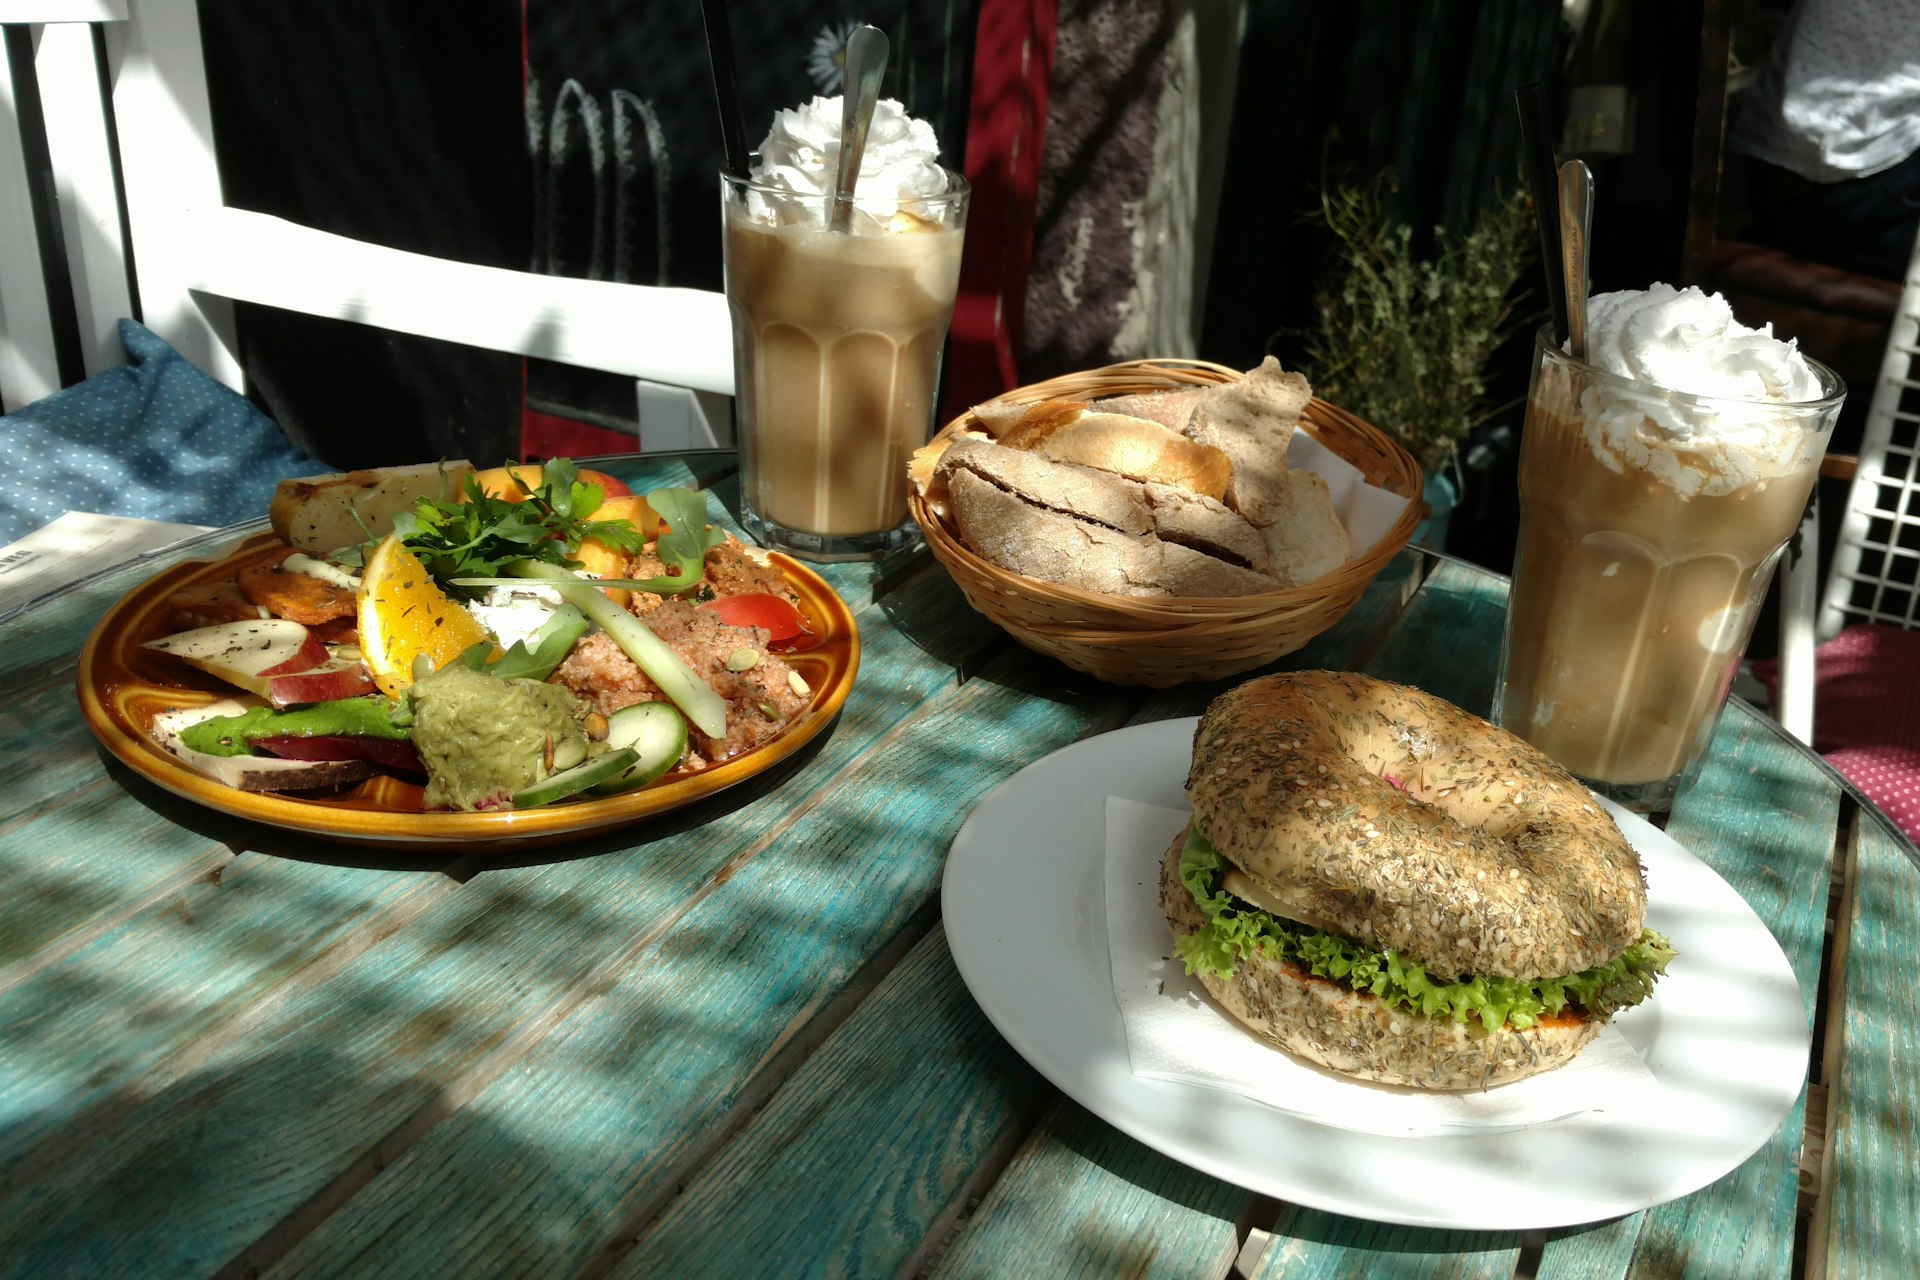 Berlin's best vegan - a colourful salad and bagel sit on a worn, blue wooden table next to two creamy looking coffees at geh Veg in Moabit, Berlin